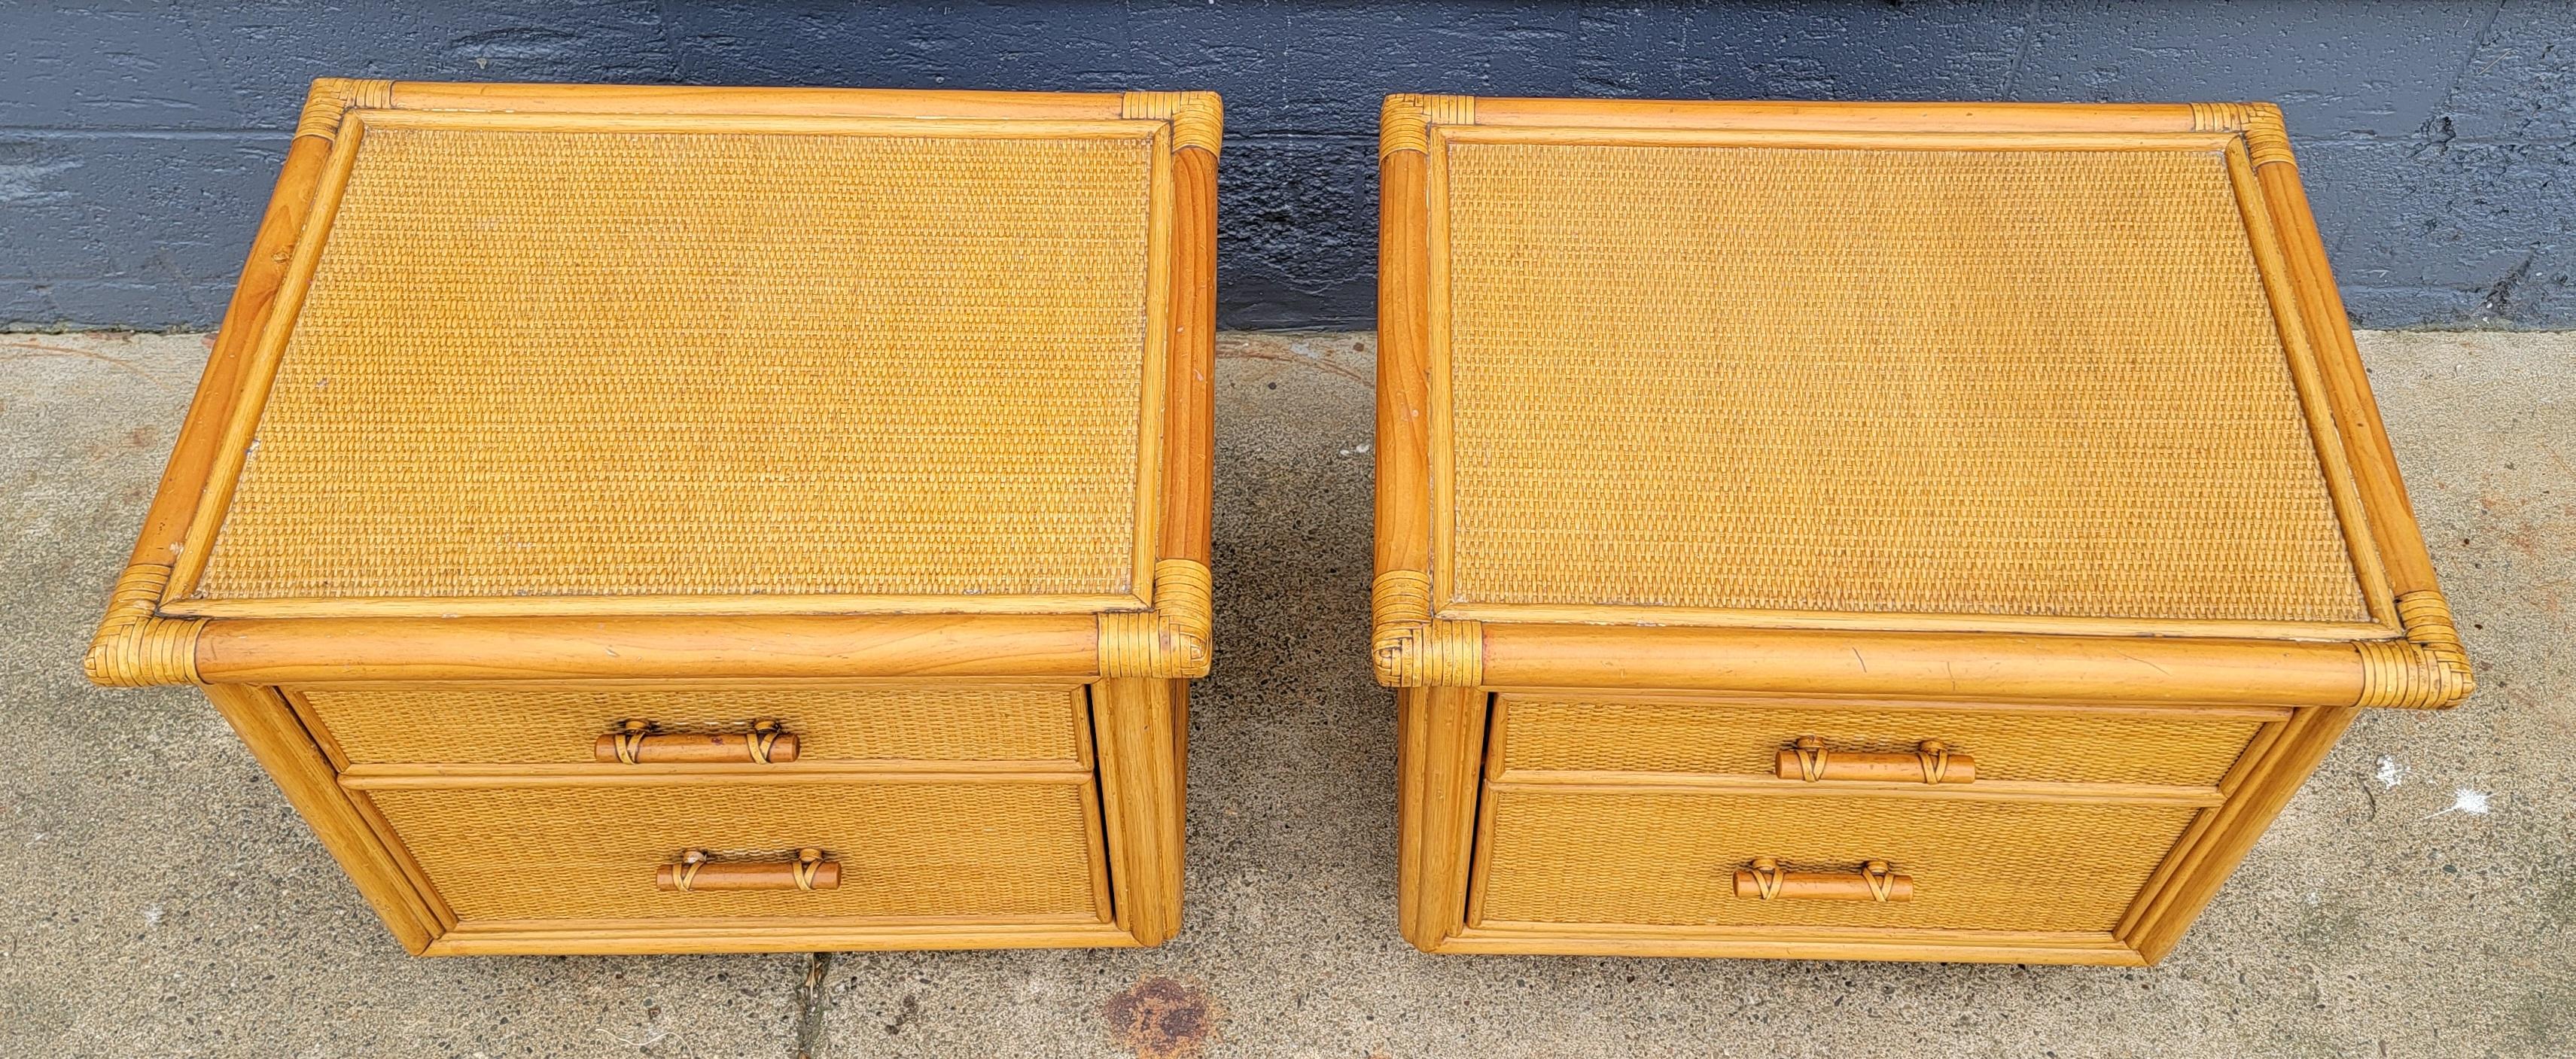 Spanish Bamboo & Wicker Organic Modern End Tables / Nightstands